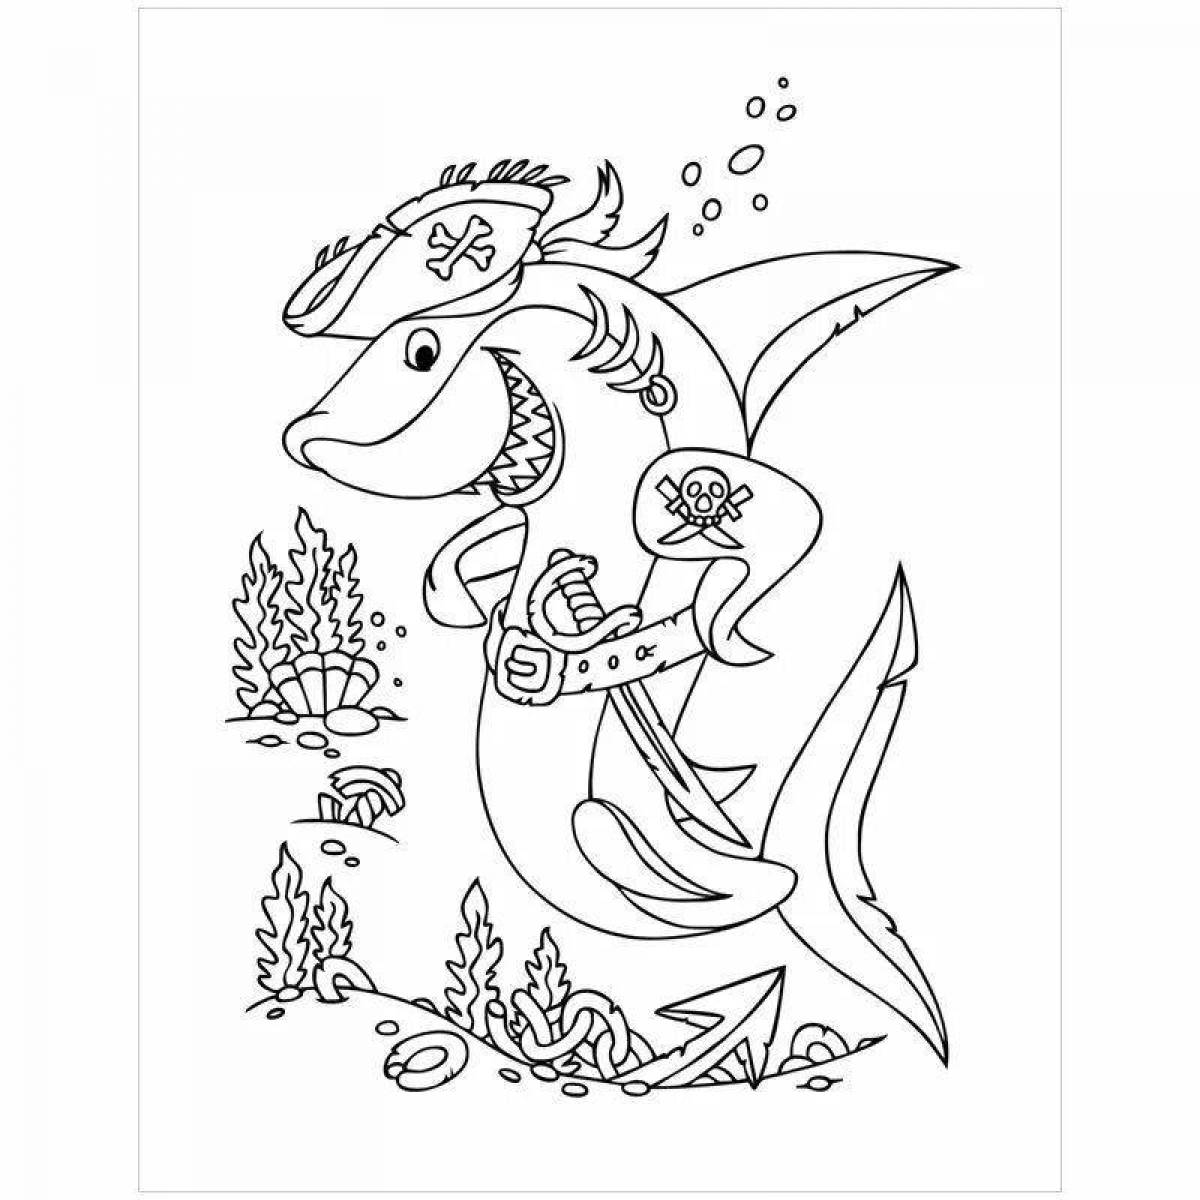 A3 playful coloring page